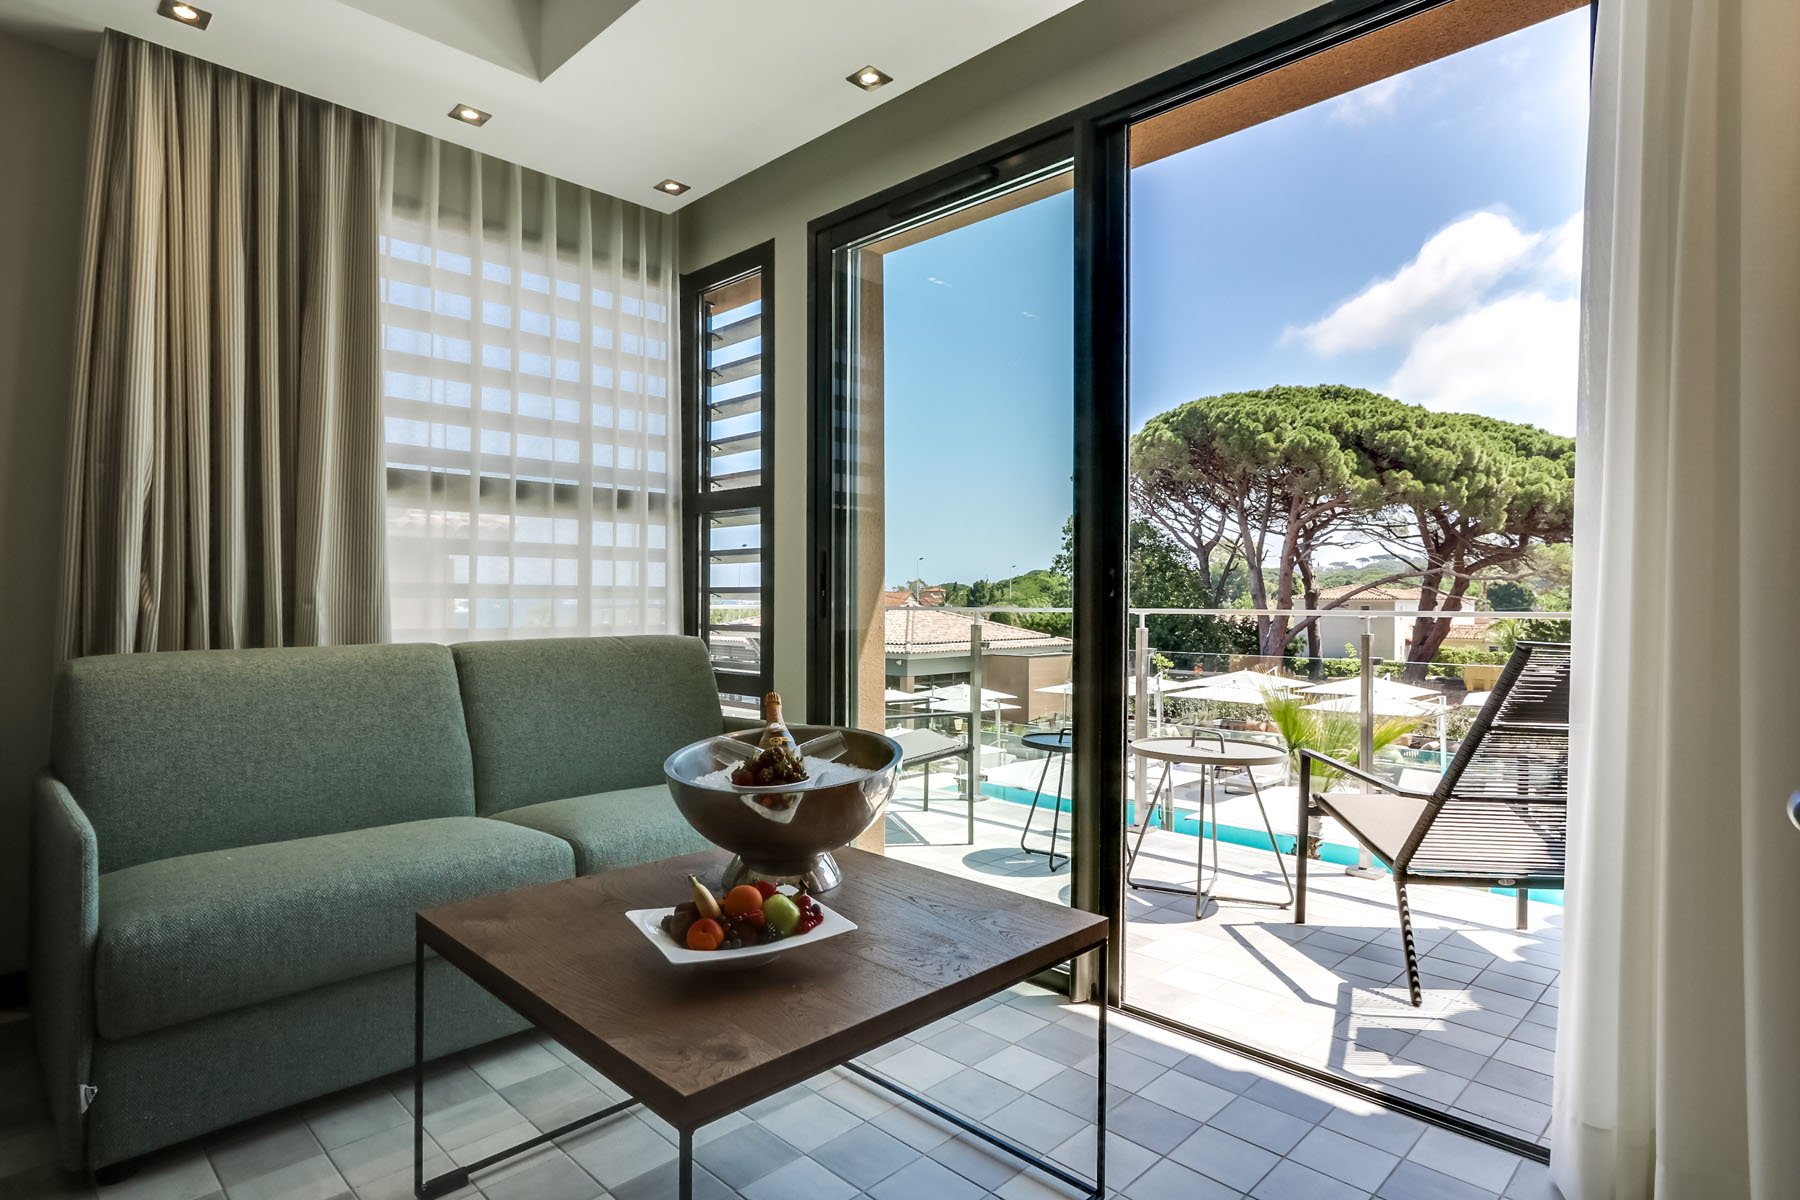 WOOD Rooms, Suites and Villa - Kube Hotel Saint-Tropez - French Riviera